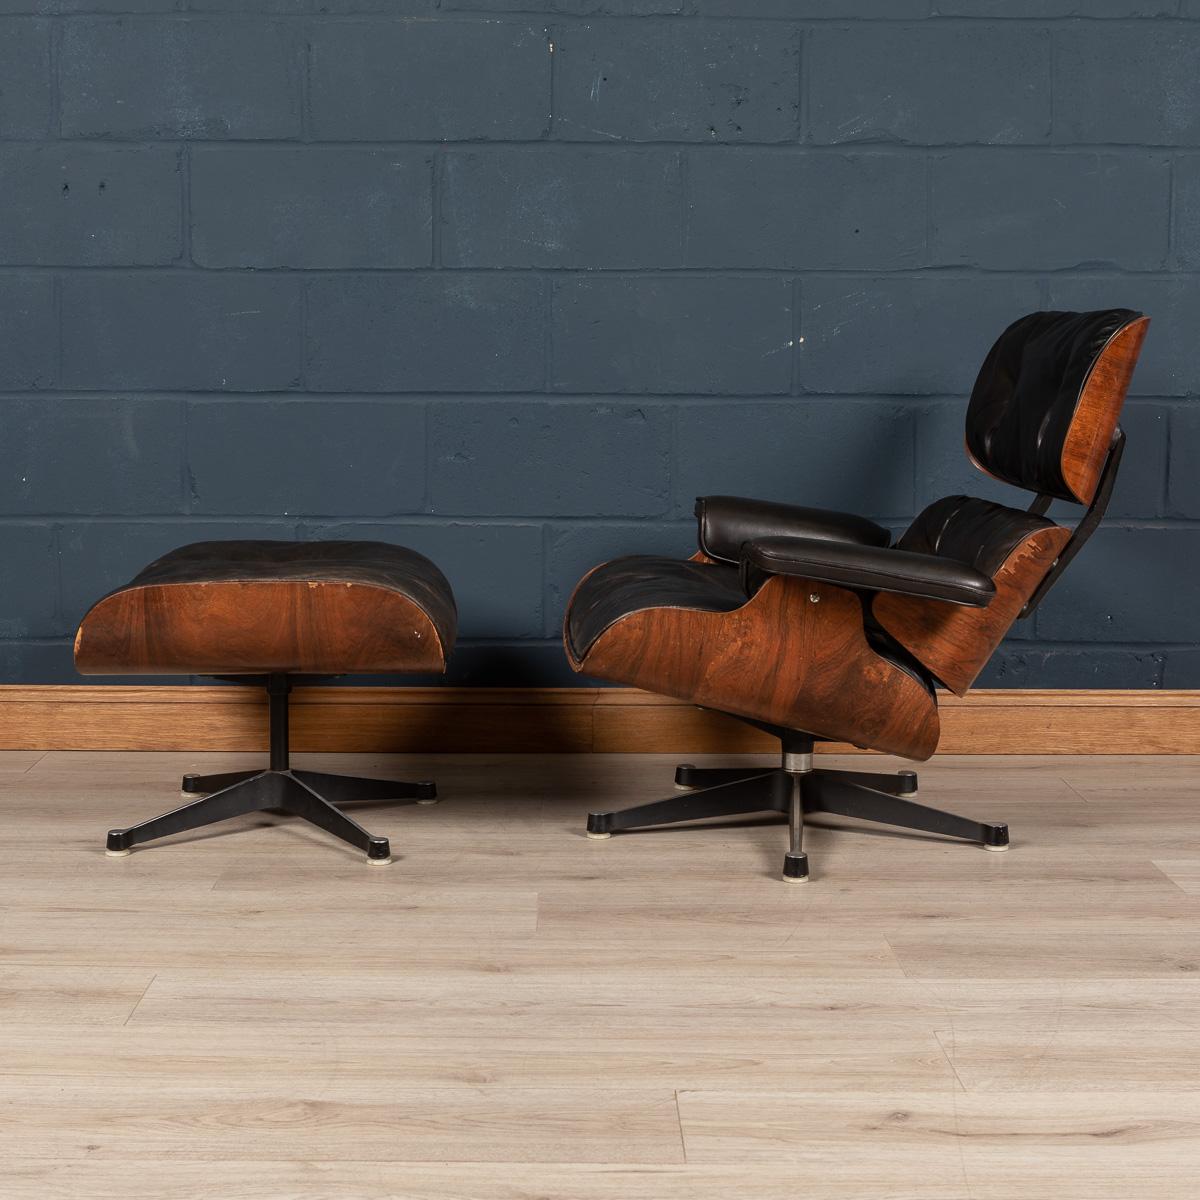 The Eames lounge chair and ottoman are furnishings made of molded plywood and leather, designed by Charles and Ray Eames for the Herman Miller furniture company. They are officially titled Eames Lounge 